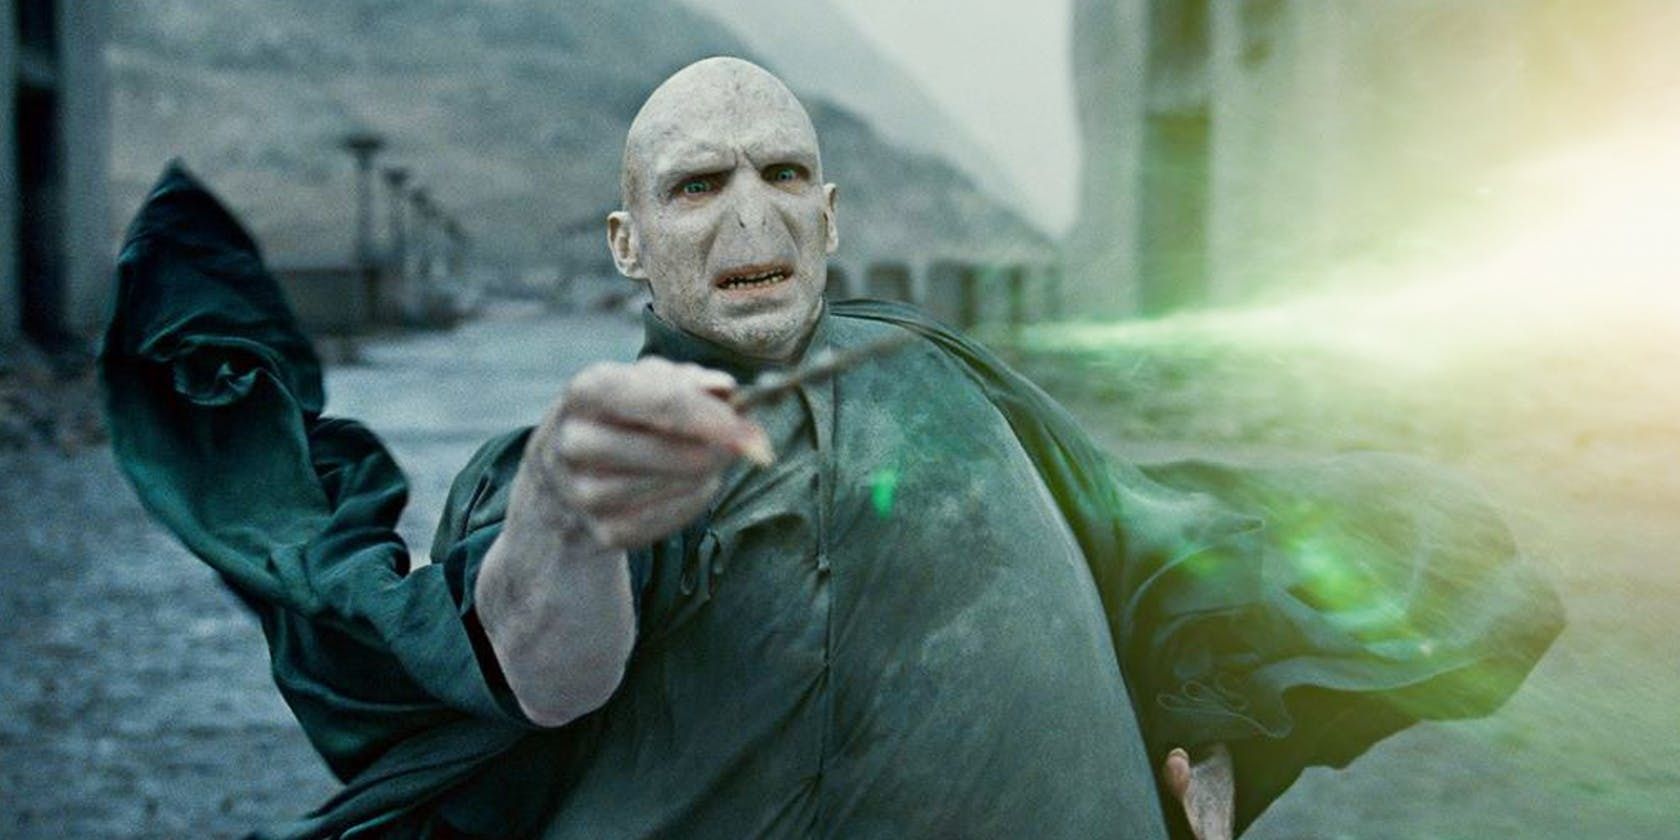 Voldemort firing the killing curse in Harry Potter and the Deathly Hallows Part 2